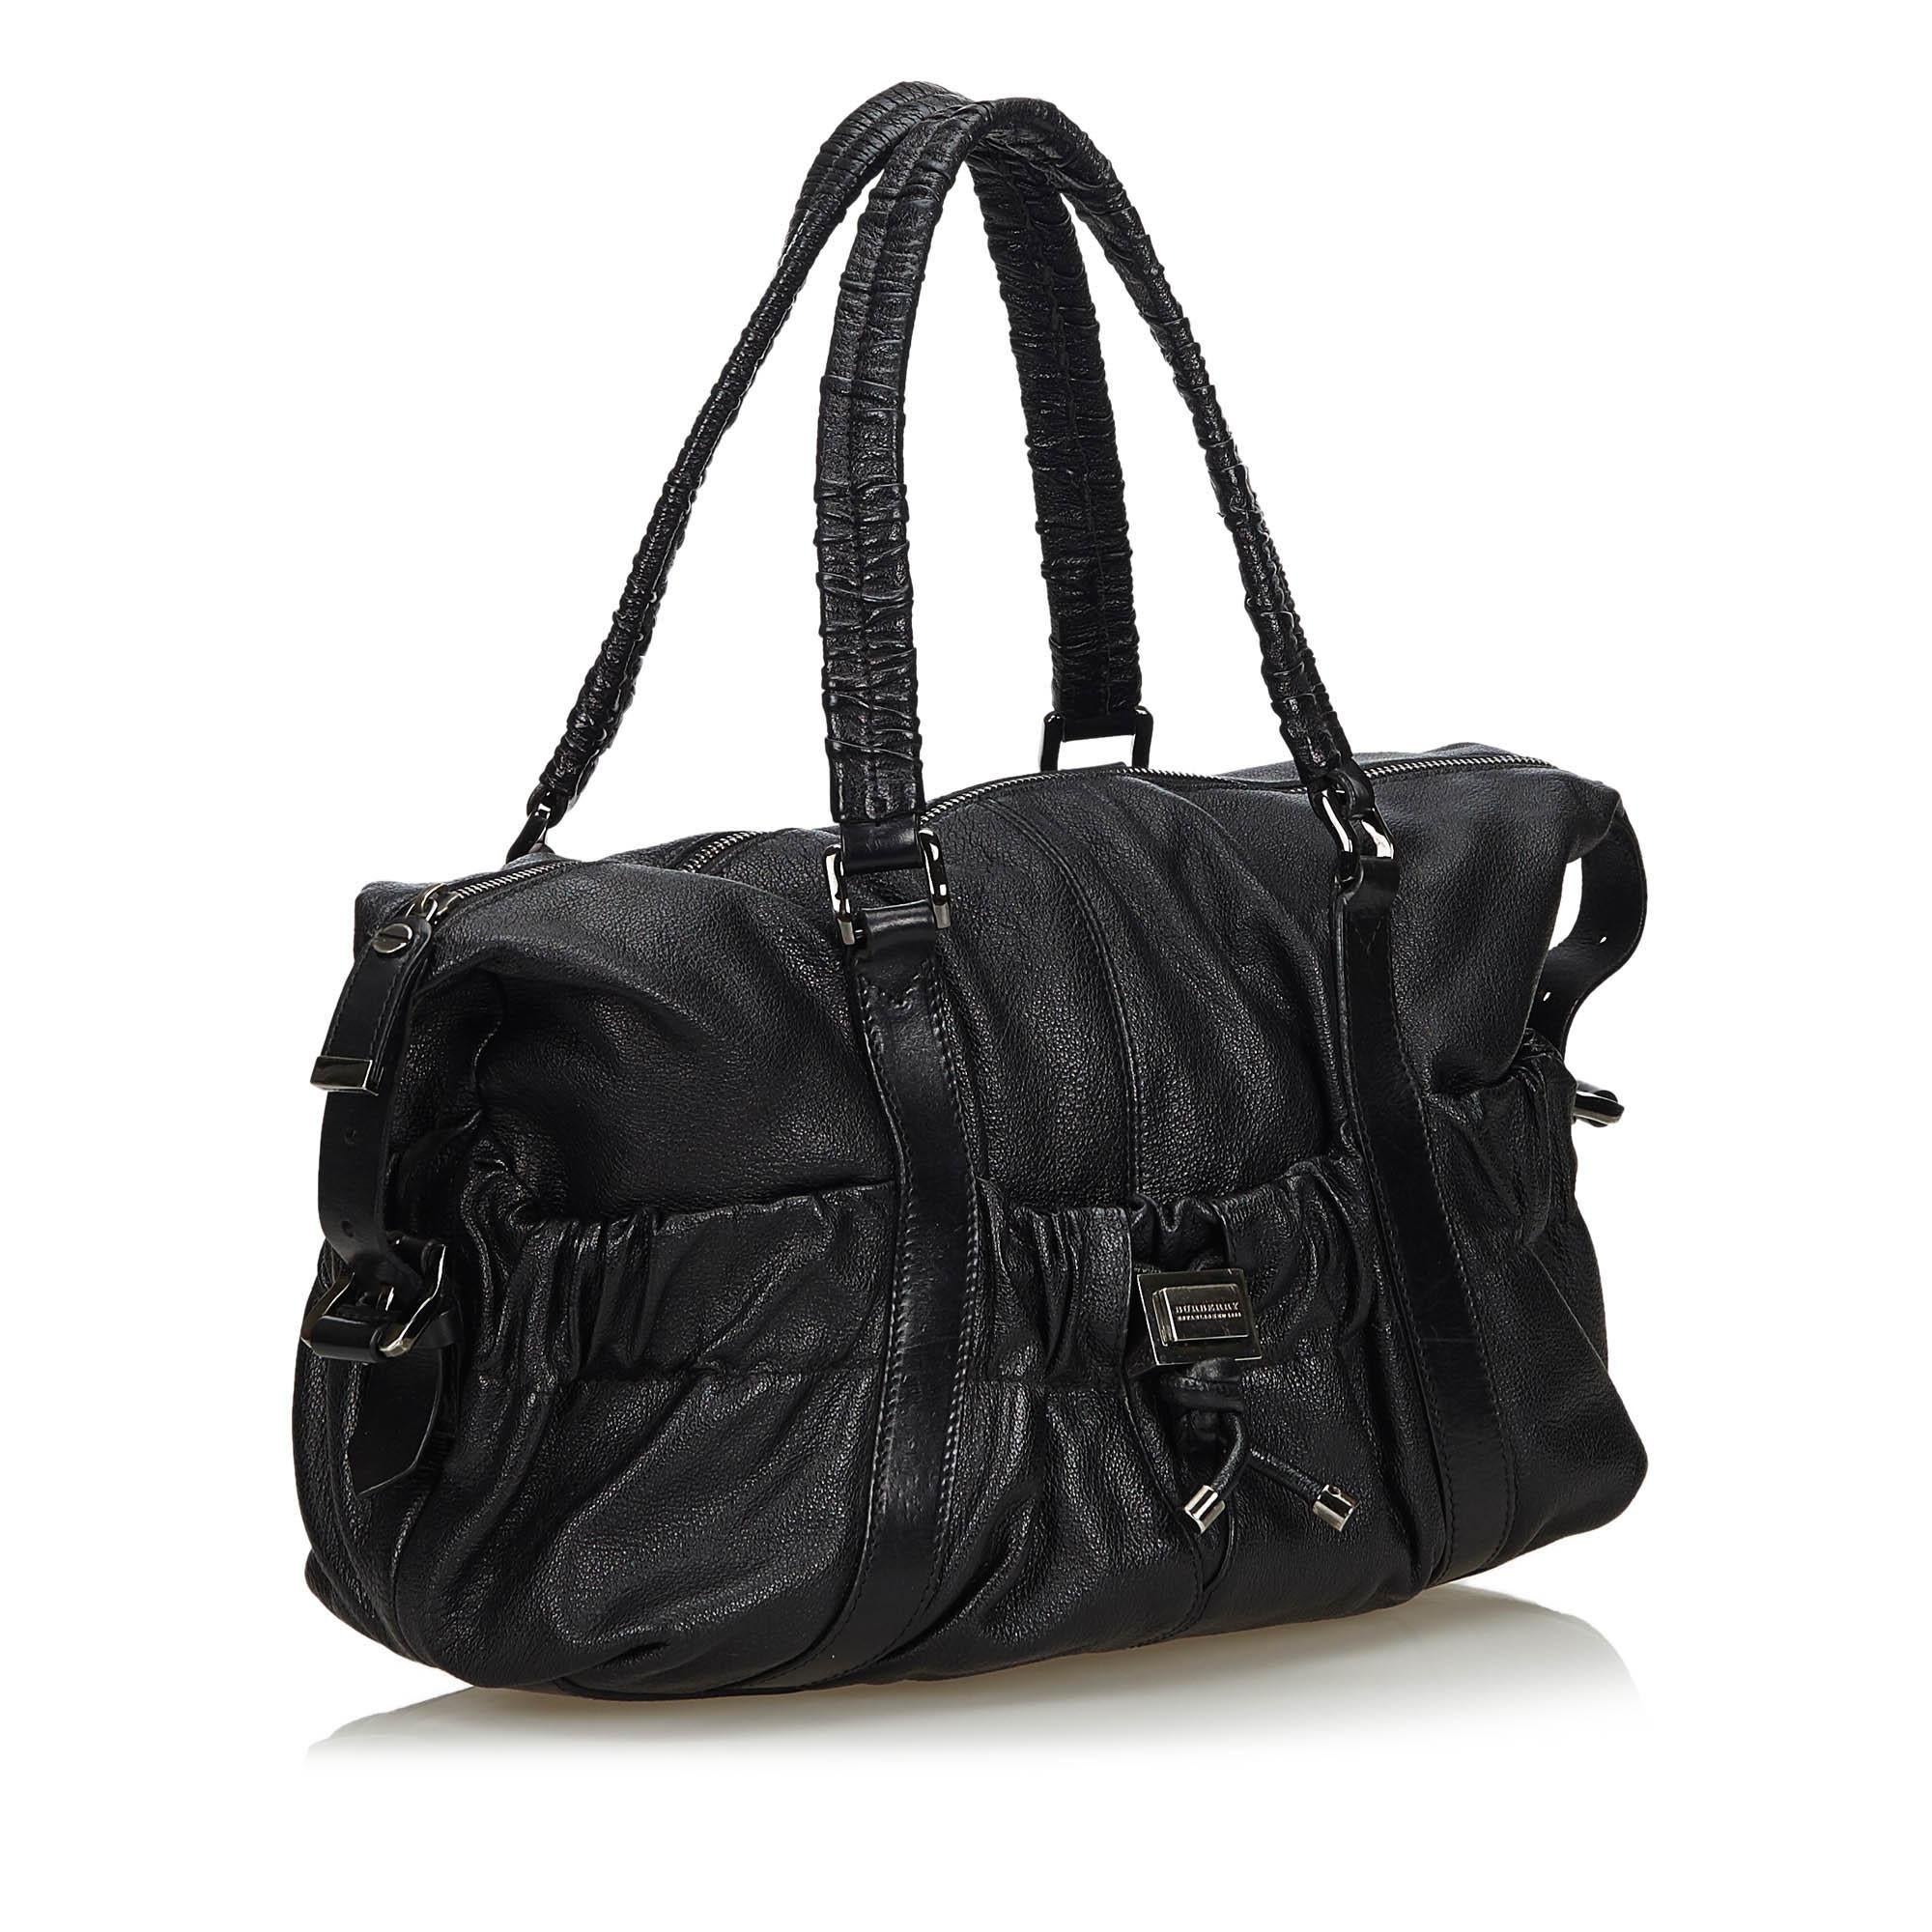 This shoulder bag features a leather body, front and side exterior slip pockets, flat leather straps, a top zip closure, and interior zip and slip pockets. It carries as B+ condition rating.

Inclusions: 
This item does not come with